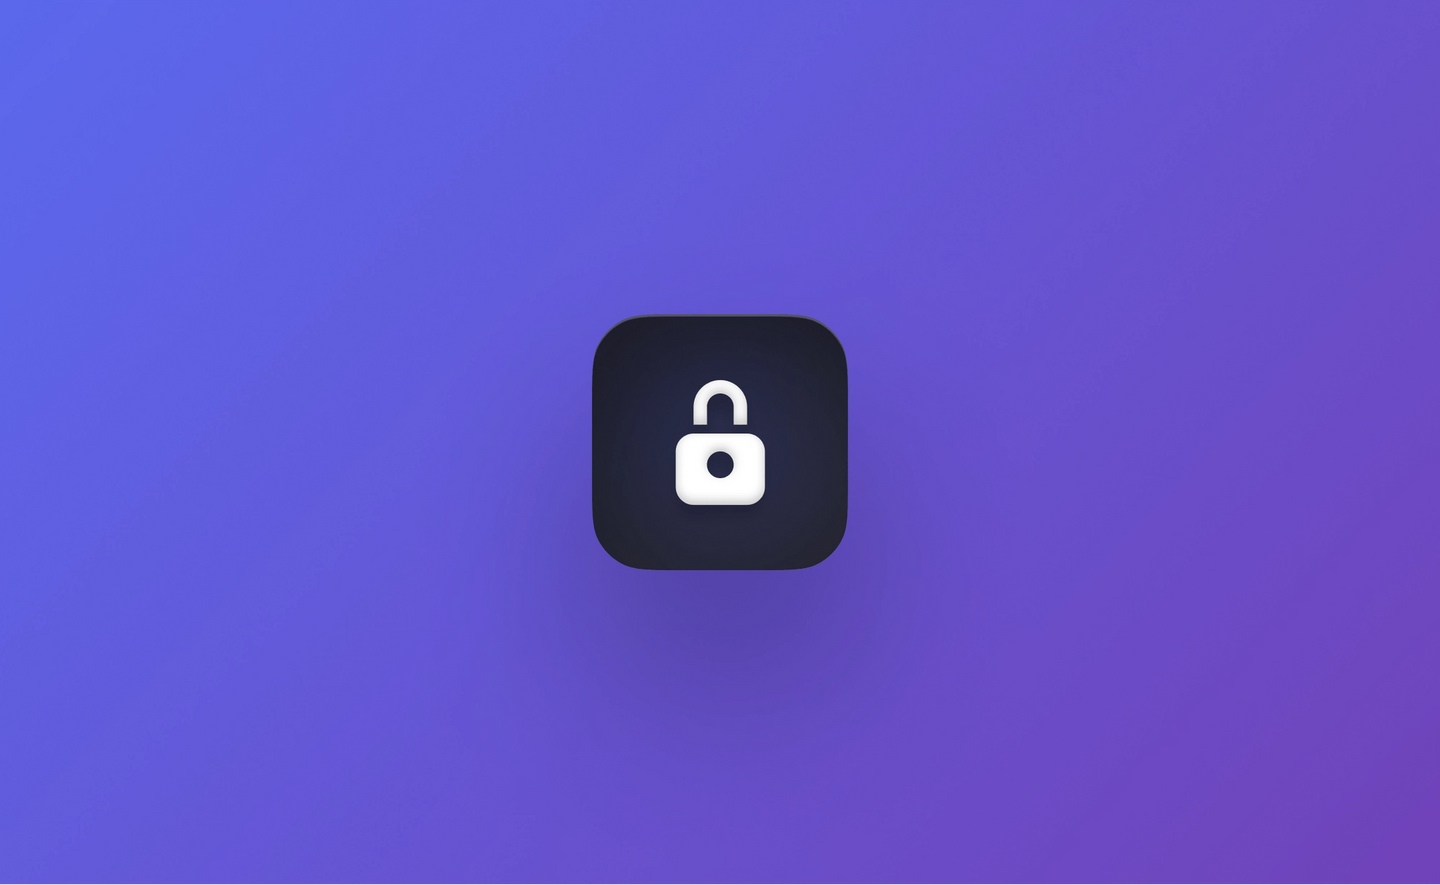 Lock icon for the security page